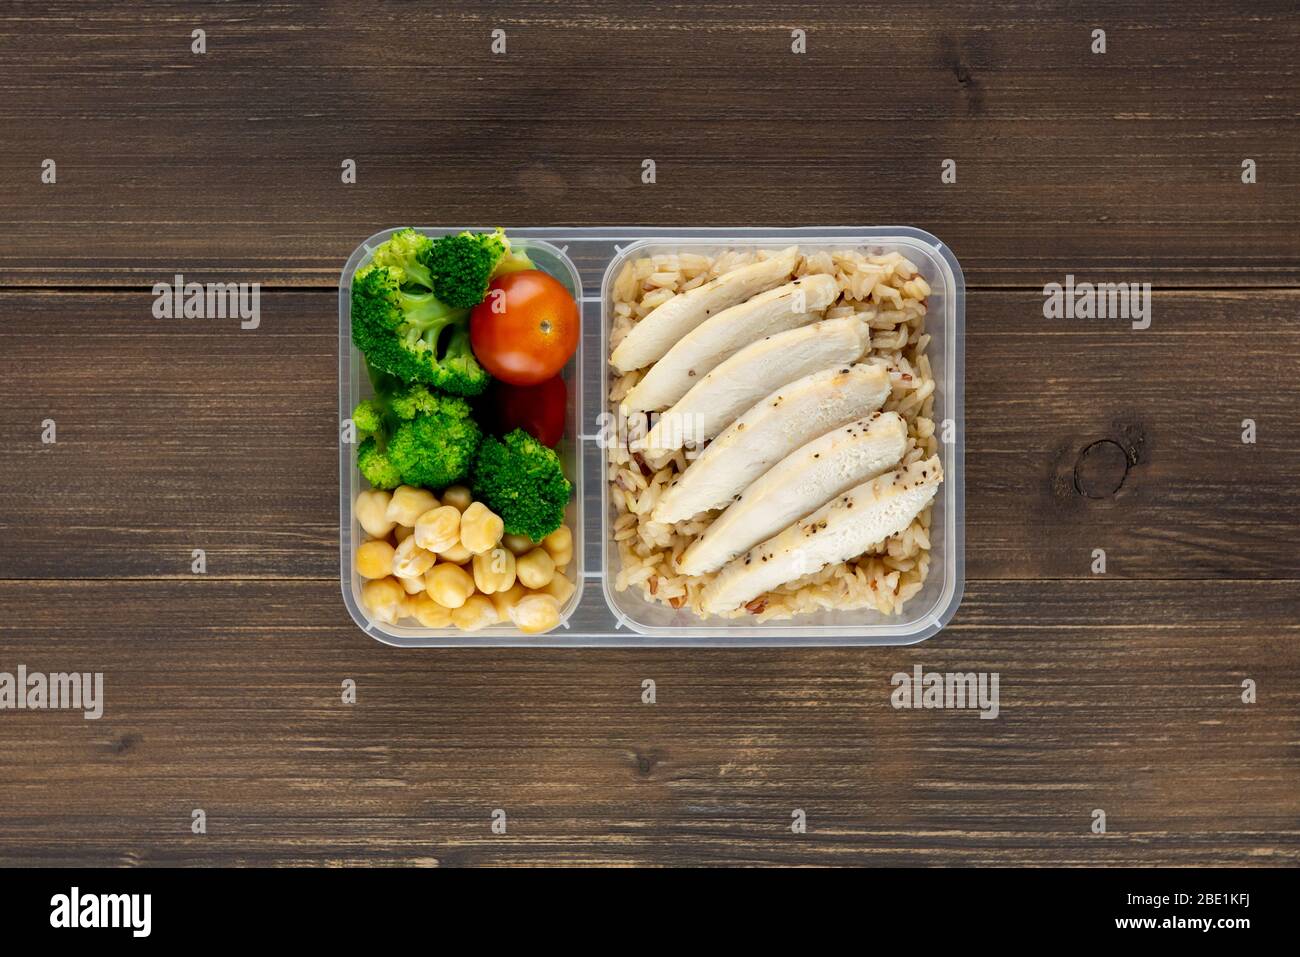 Nutrient dense healthy low fat food in takeaway meal box set on wood background top view Stock Photo